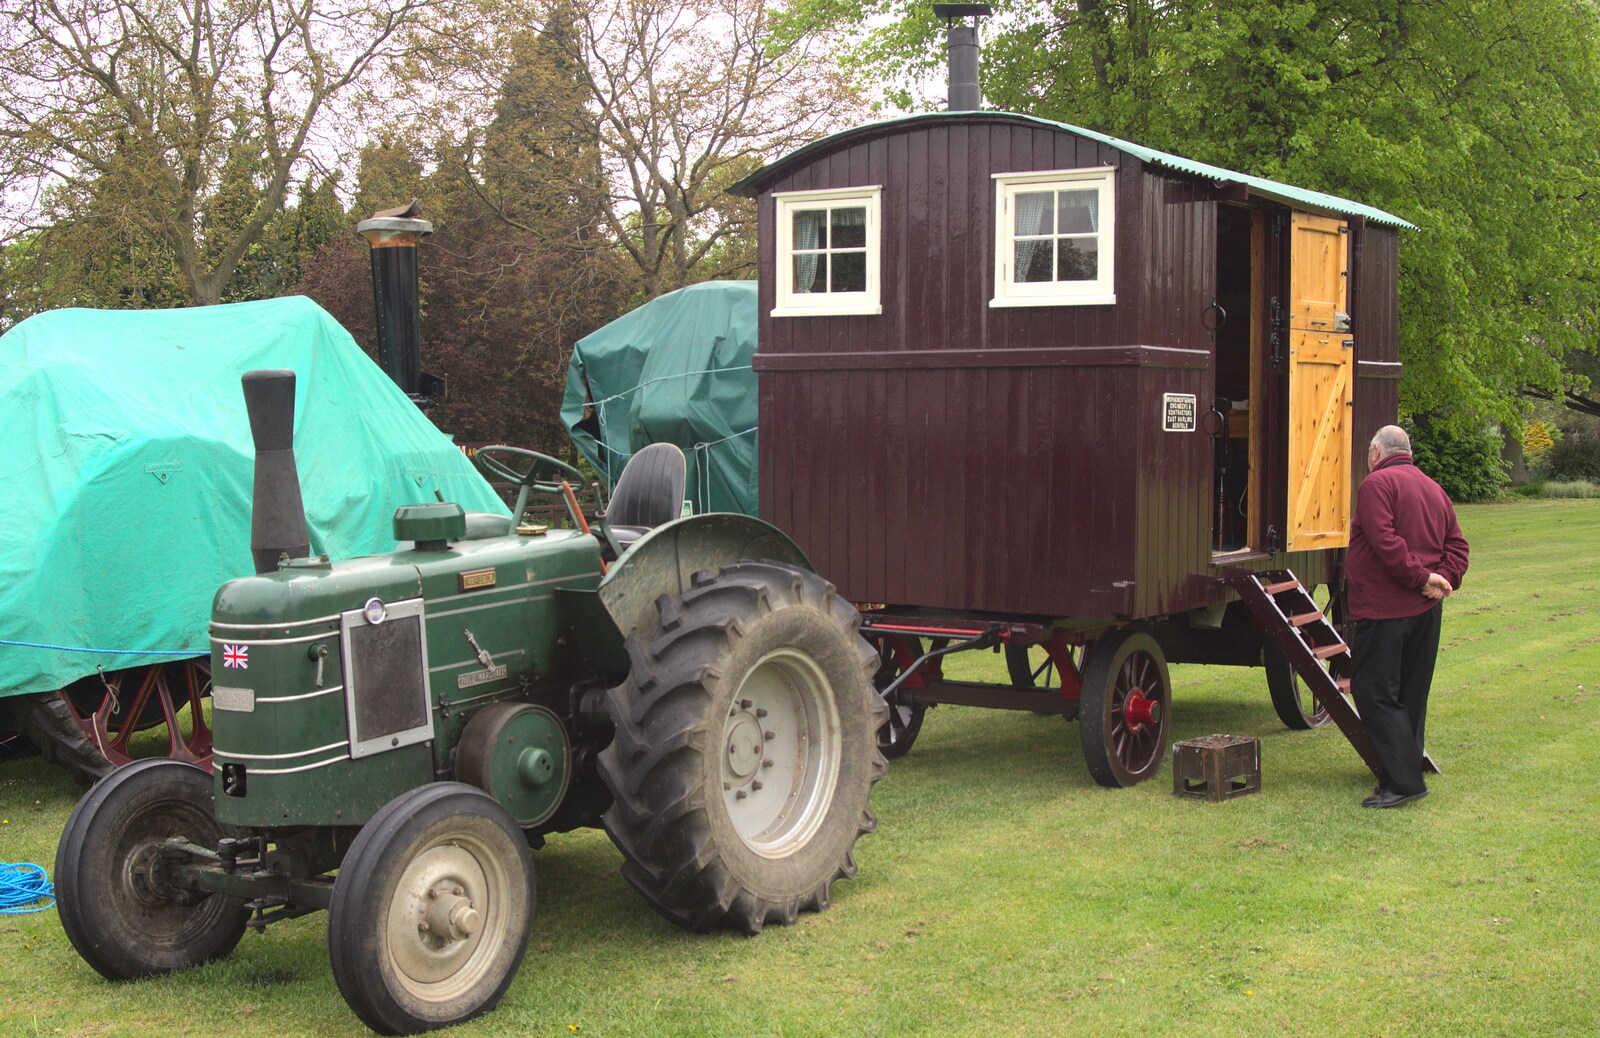 An old Field Marshall tractor and a house on wheels from A Day at Bressingham Steam and Gardens, Diss, Norfolk - 18th May 2013